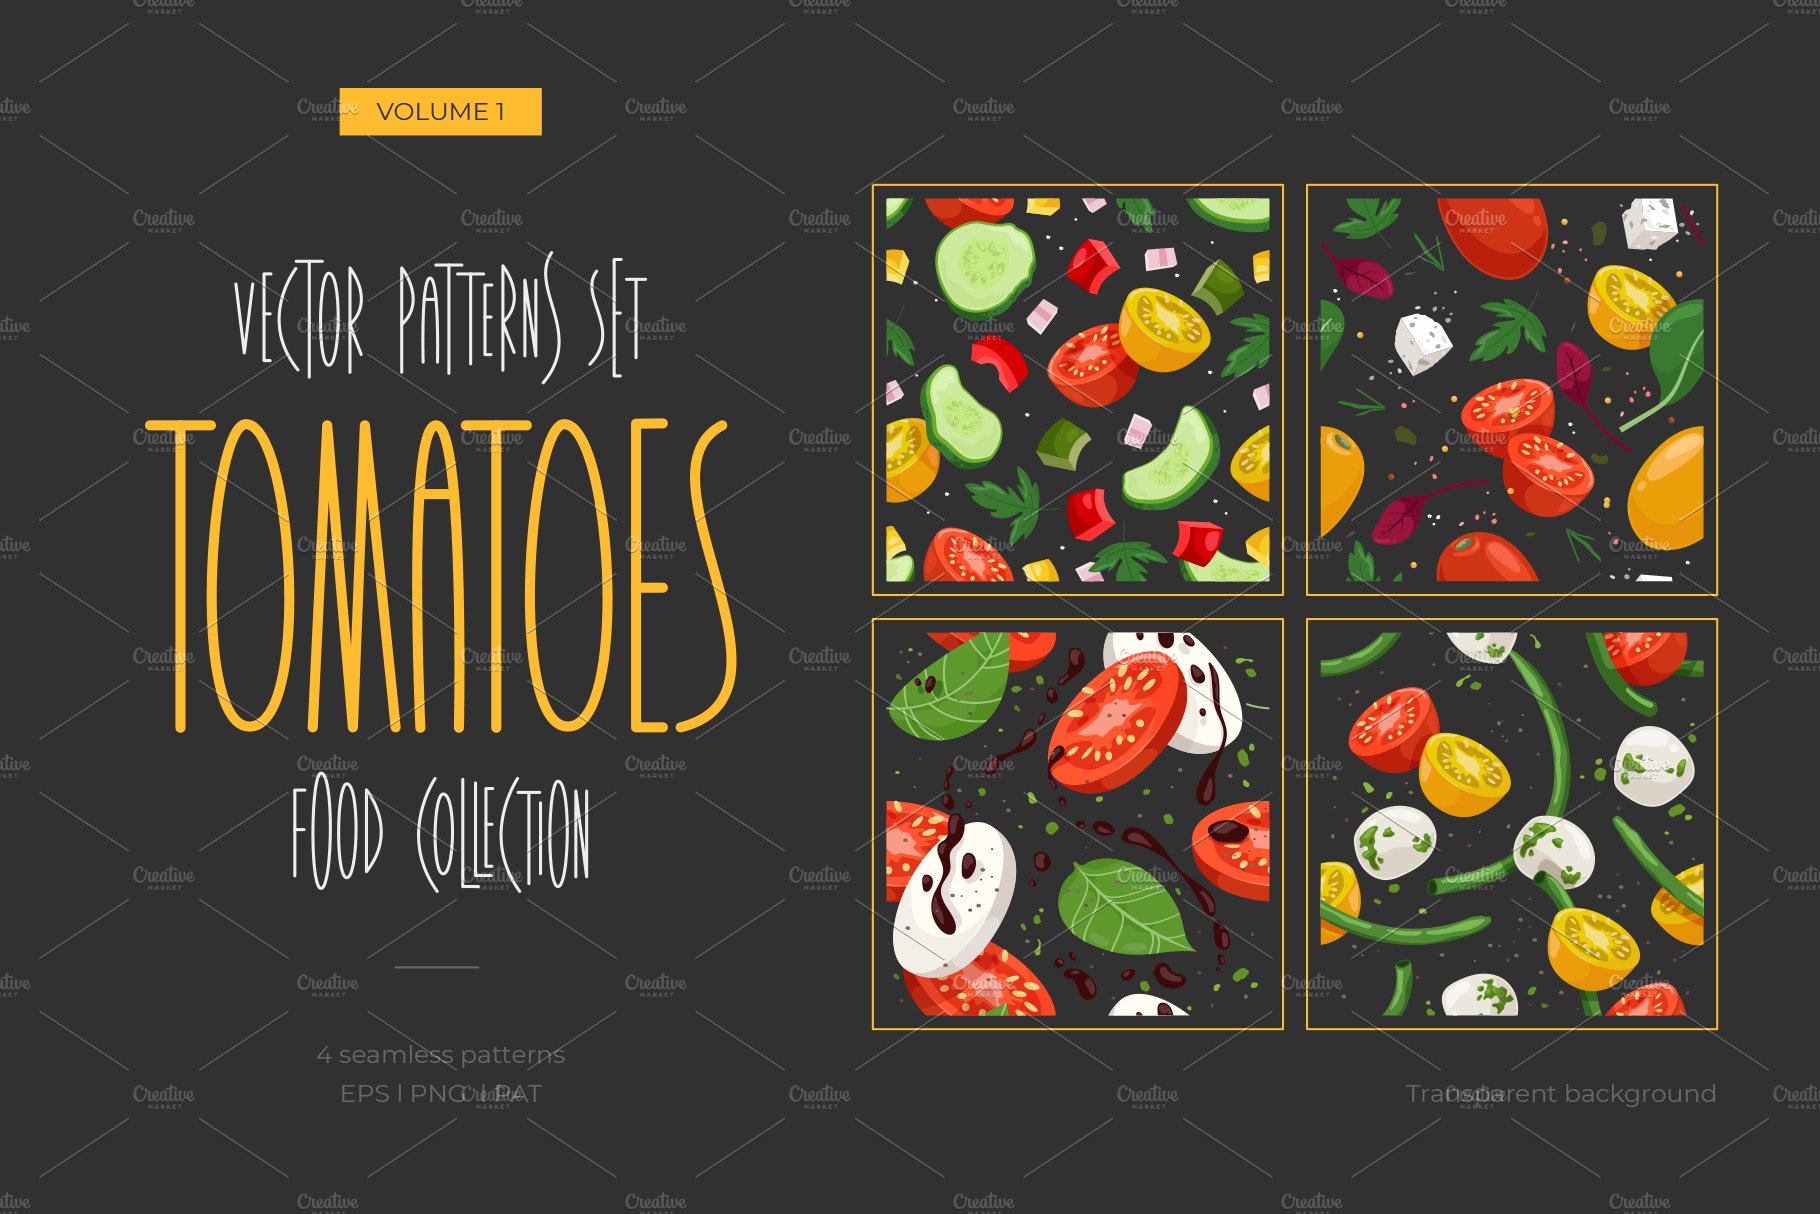 Tomatoes Vector Patterns cover image.